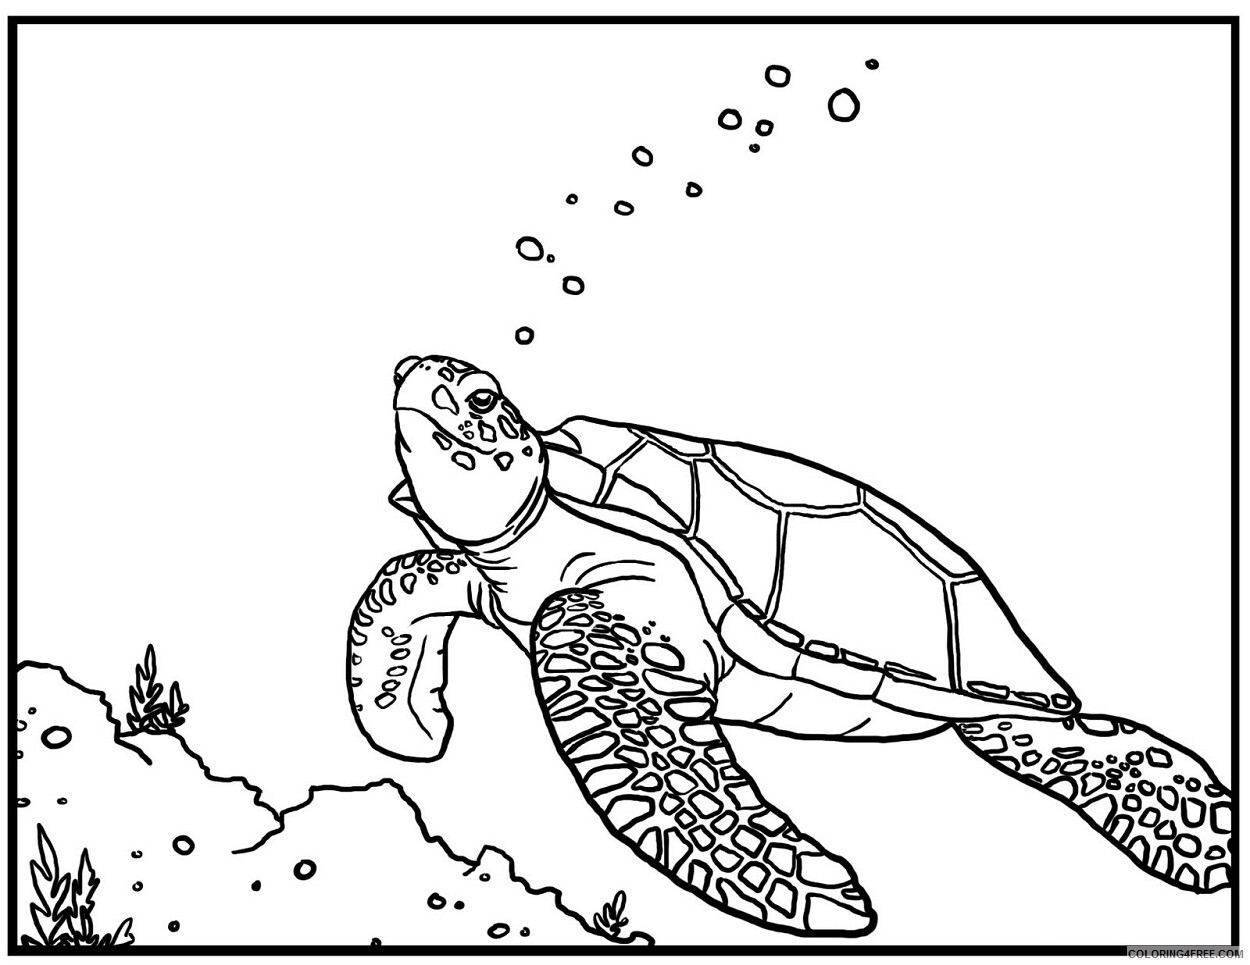 Sea Turtle Coloring Pages Animal Printable Sheets Sea Turtle For Kids 2021 4365 Coloring4free